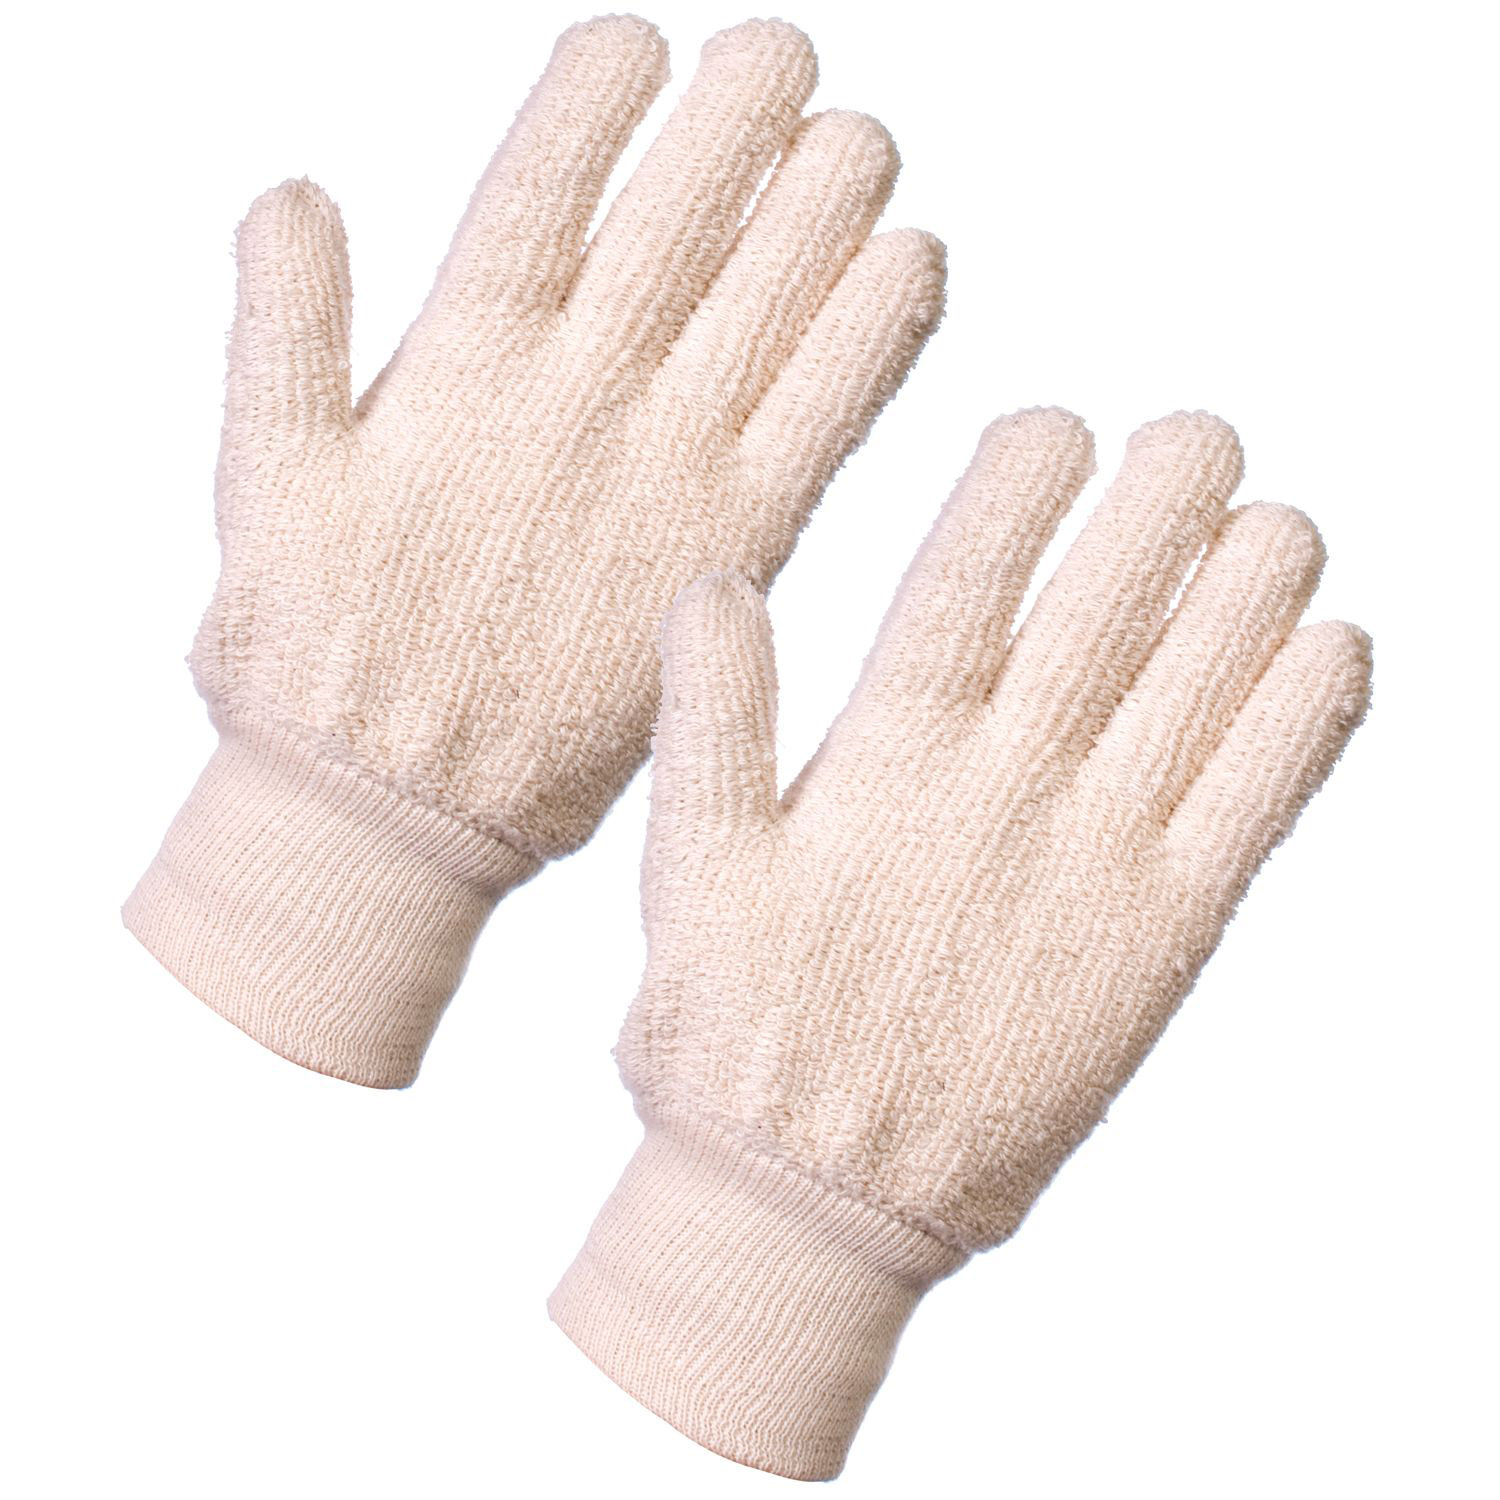 Soft & Comfortable Terry Cotton Gloves